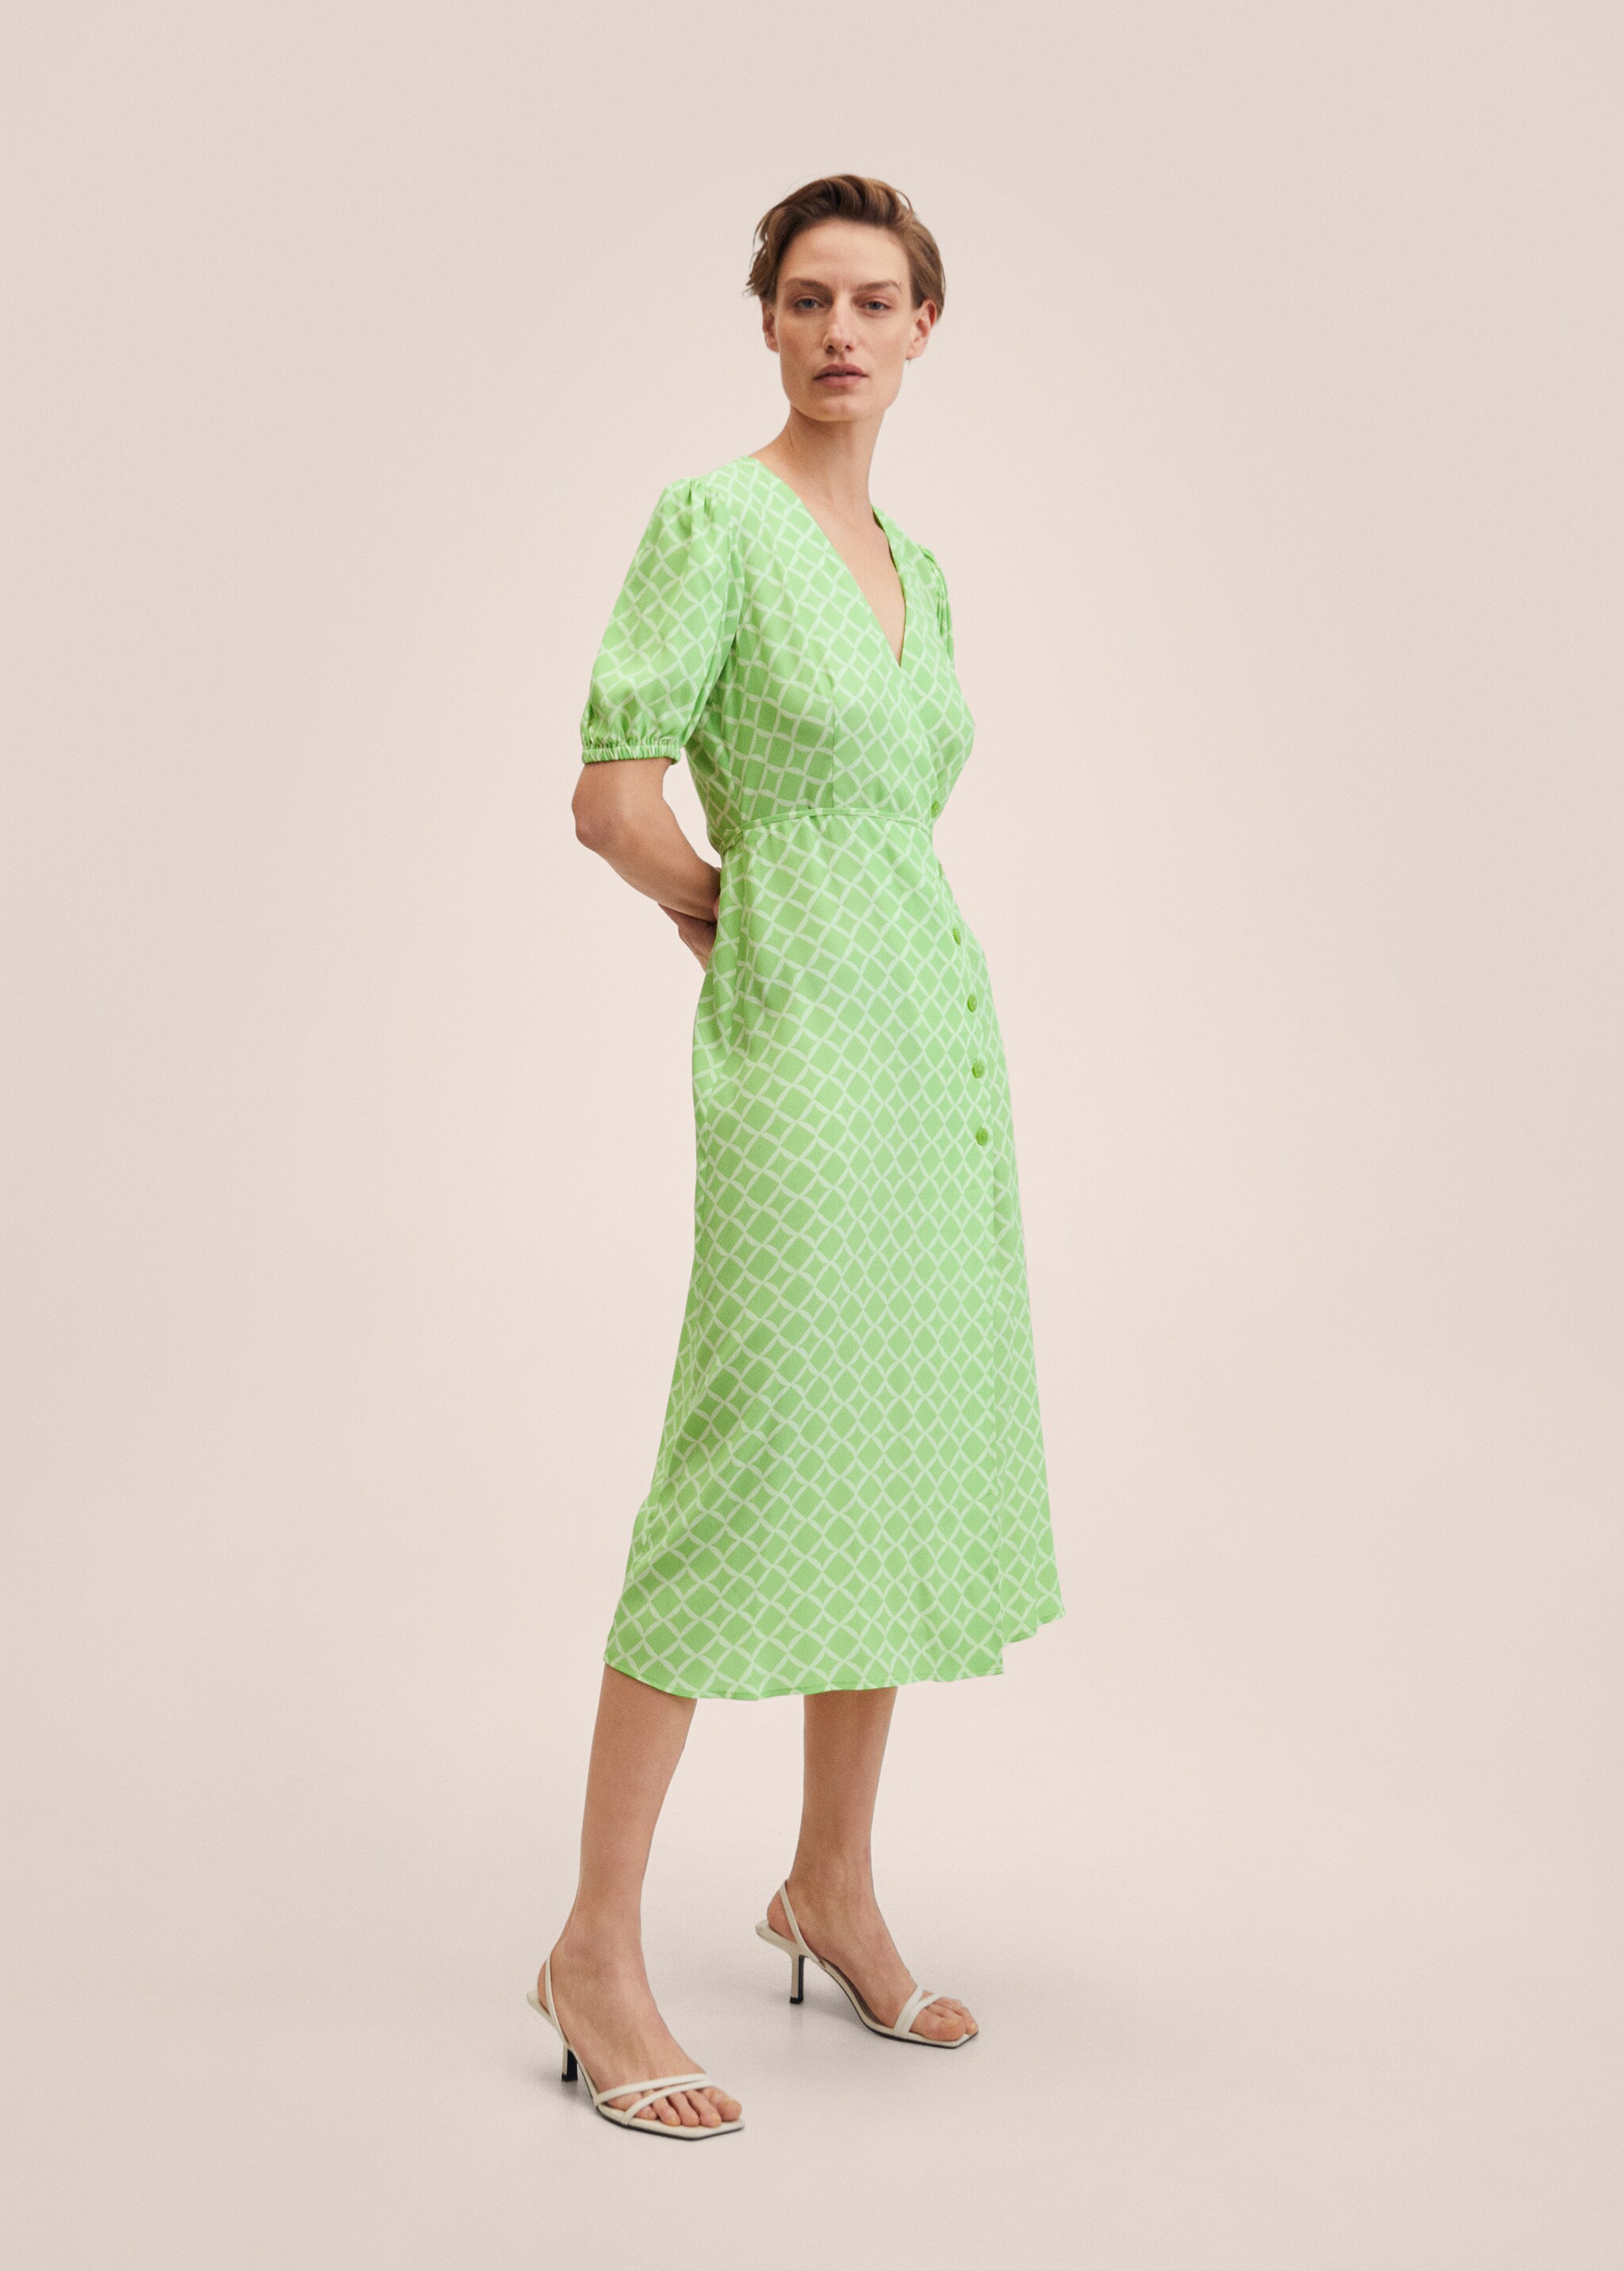 Printed dress with balloon sleeves  - General plane